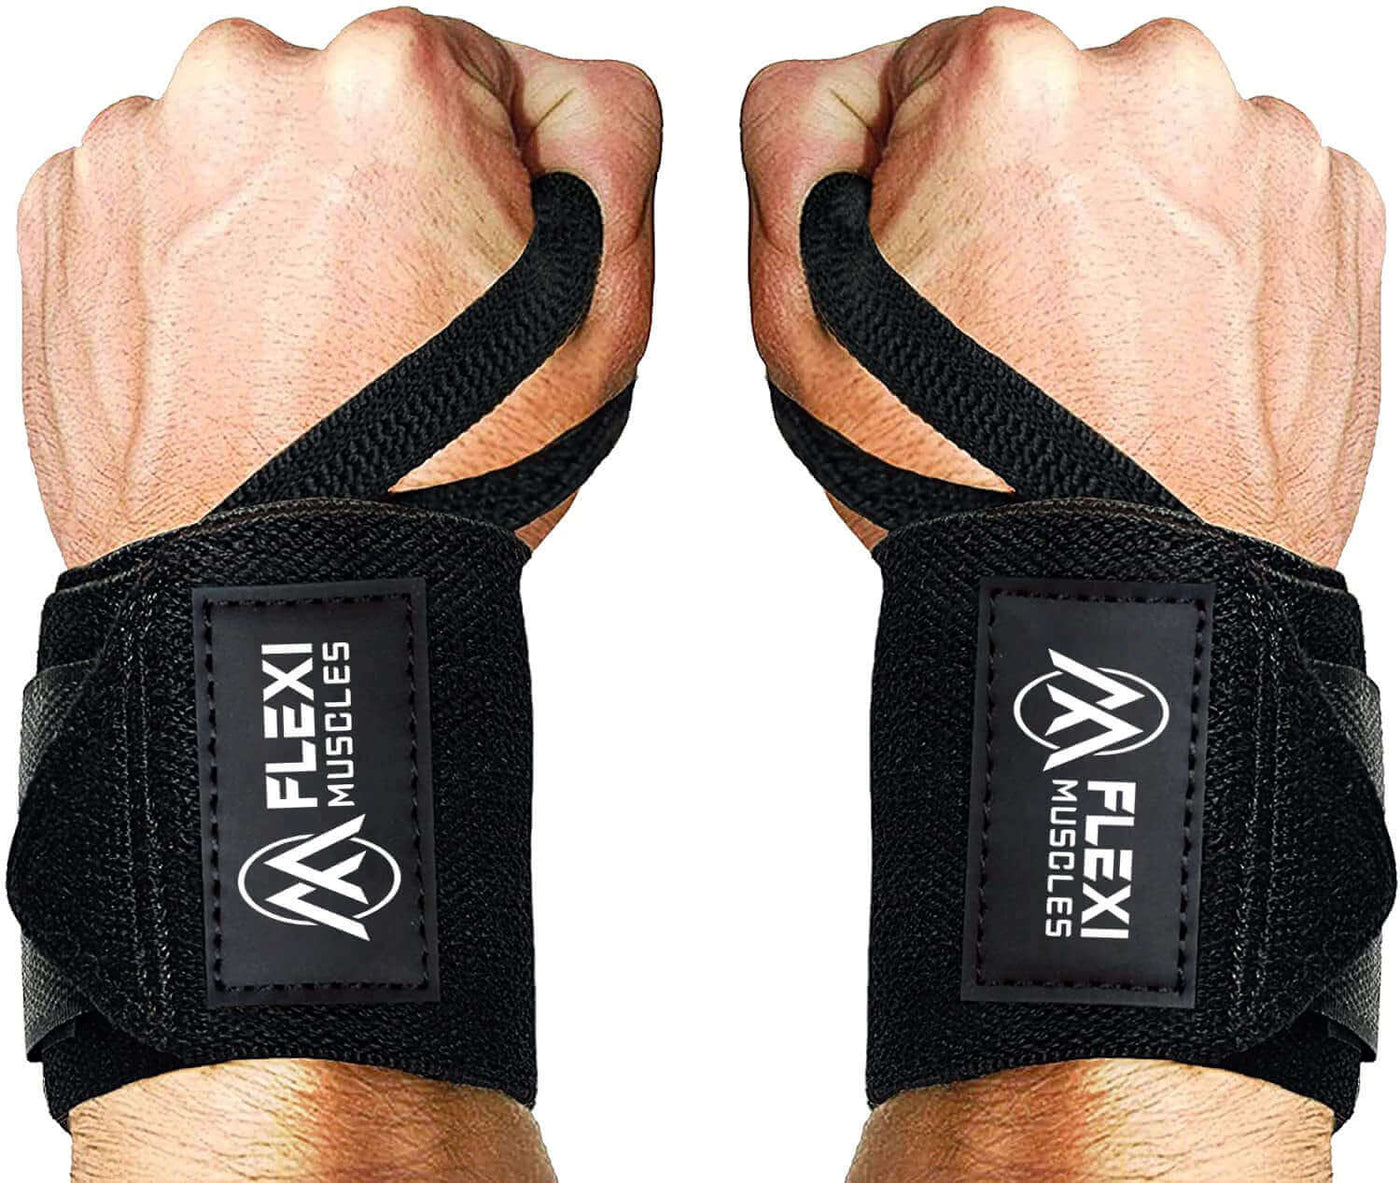 Flexi Muscles - Wrist Wraps For Weightlifting